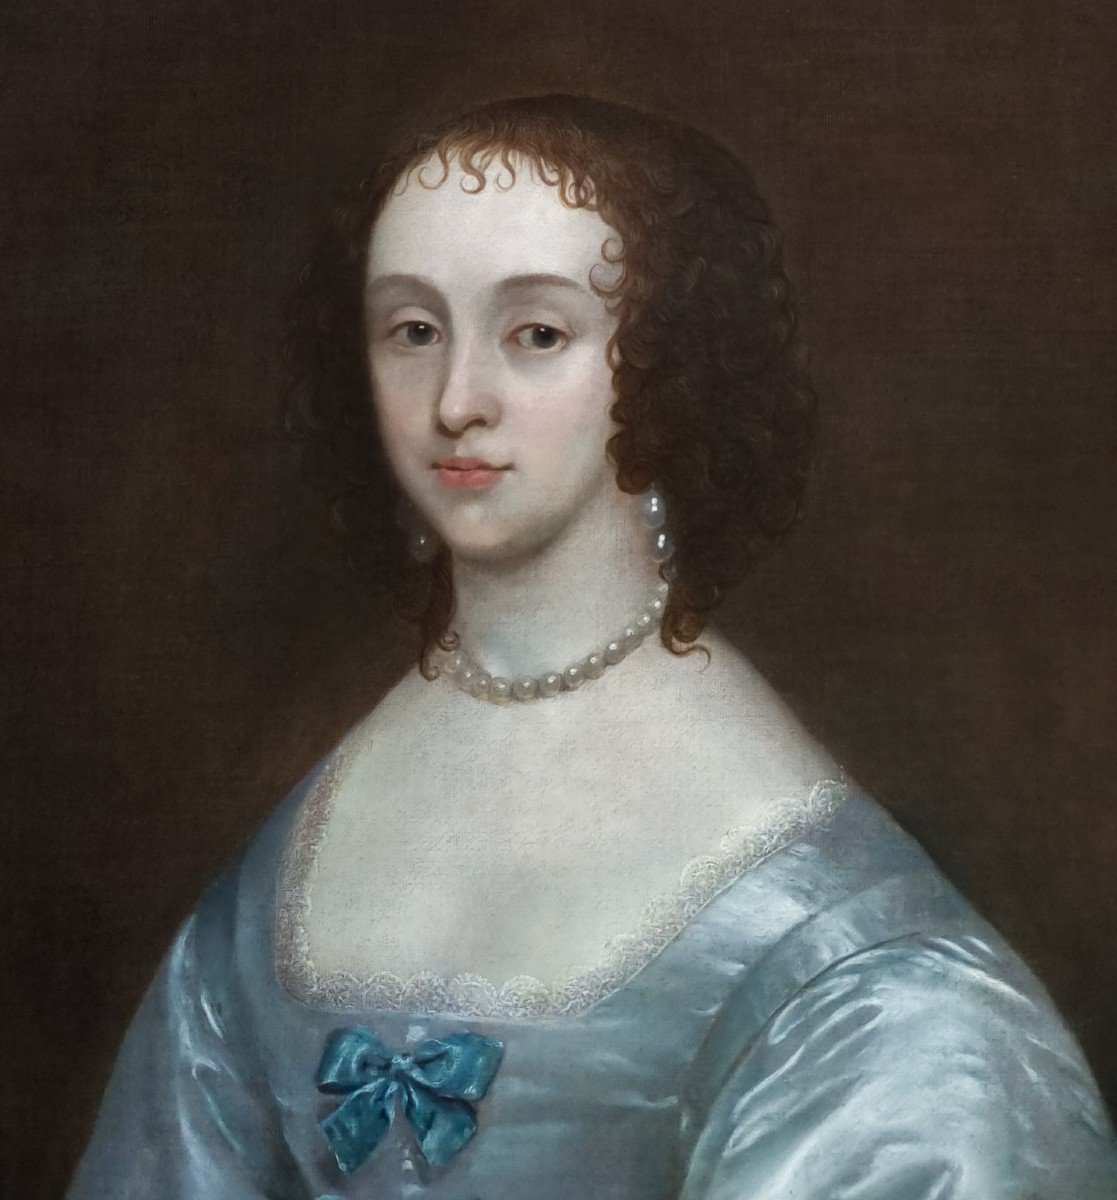 Portrait Of A Lady, Katherine St Aubyn Godolphin C.1637, Antique Painting Oil On Canvas-photo-4